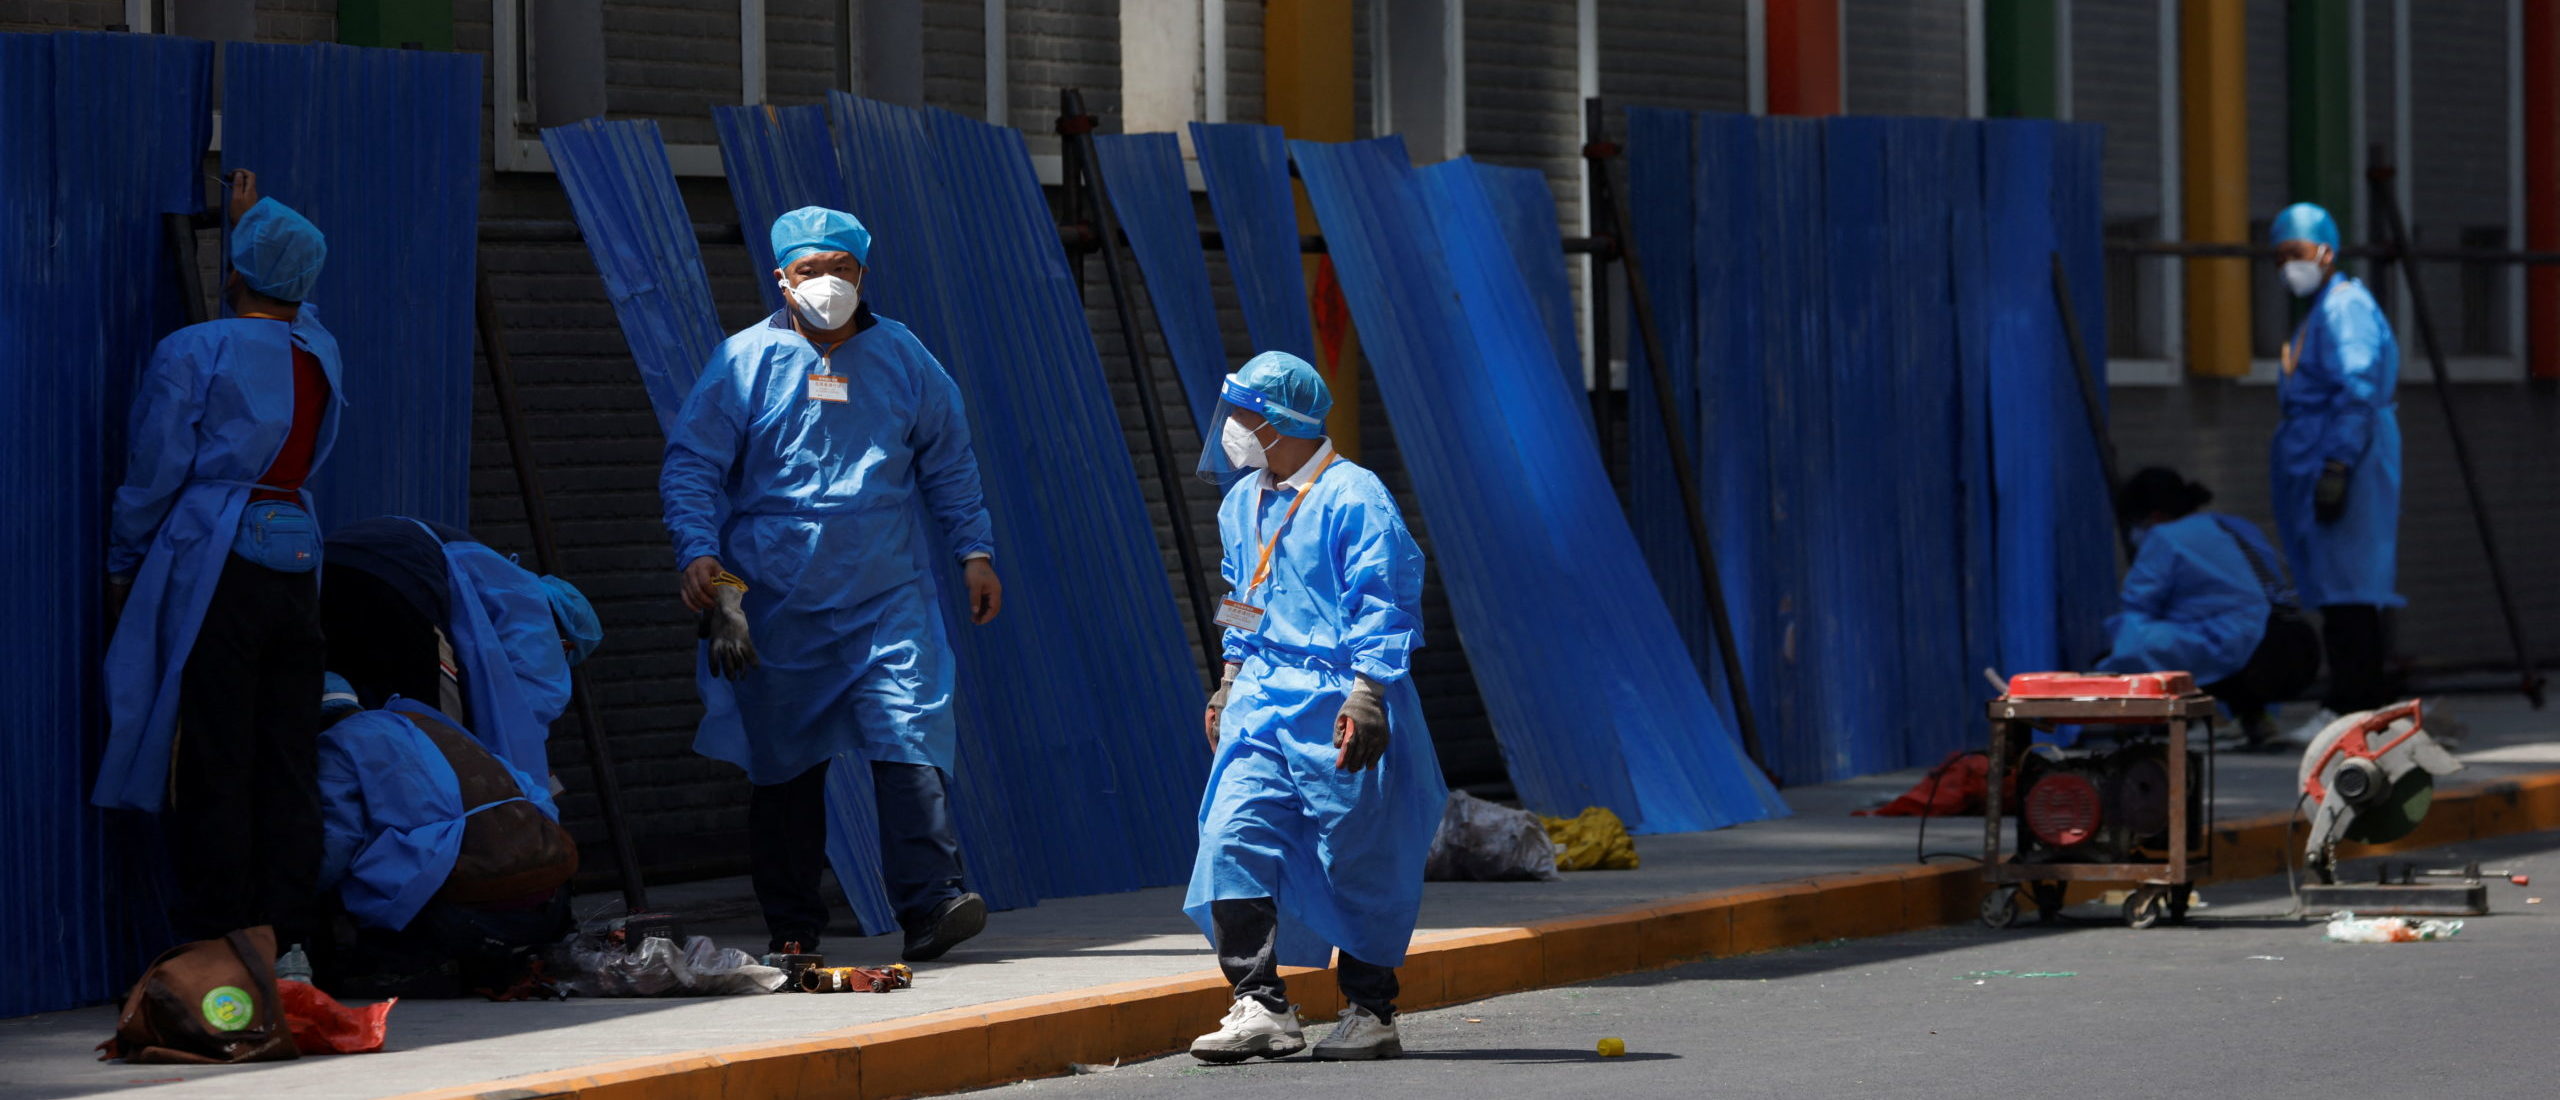 Workers wearing personal protective equipment (PPE), install a barricade around a residential area under lockdown, amid the coronavirus disease (COVID-19) outbreak in Beijing, China, May 4, 2022. (REUTERS/Carlos Garcia Rawlins)